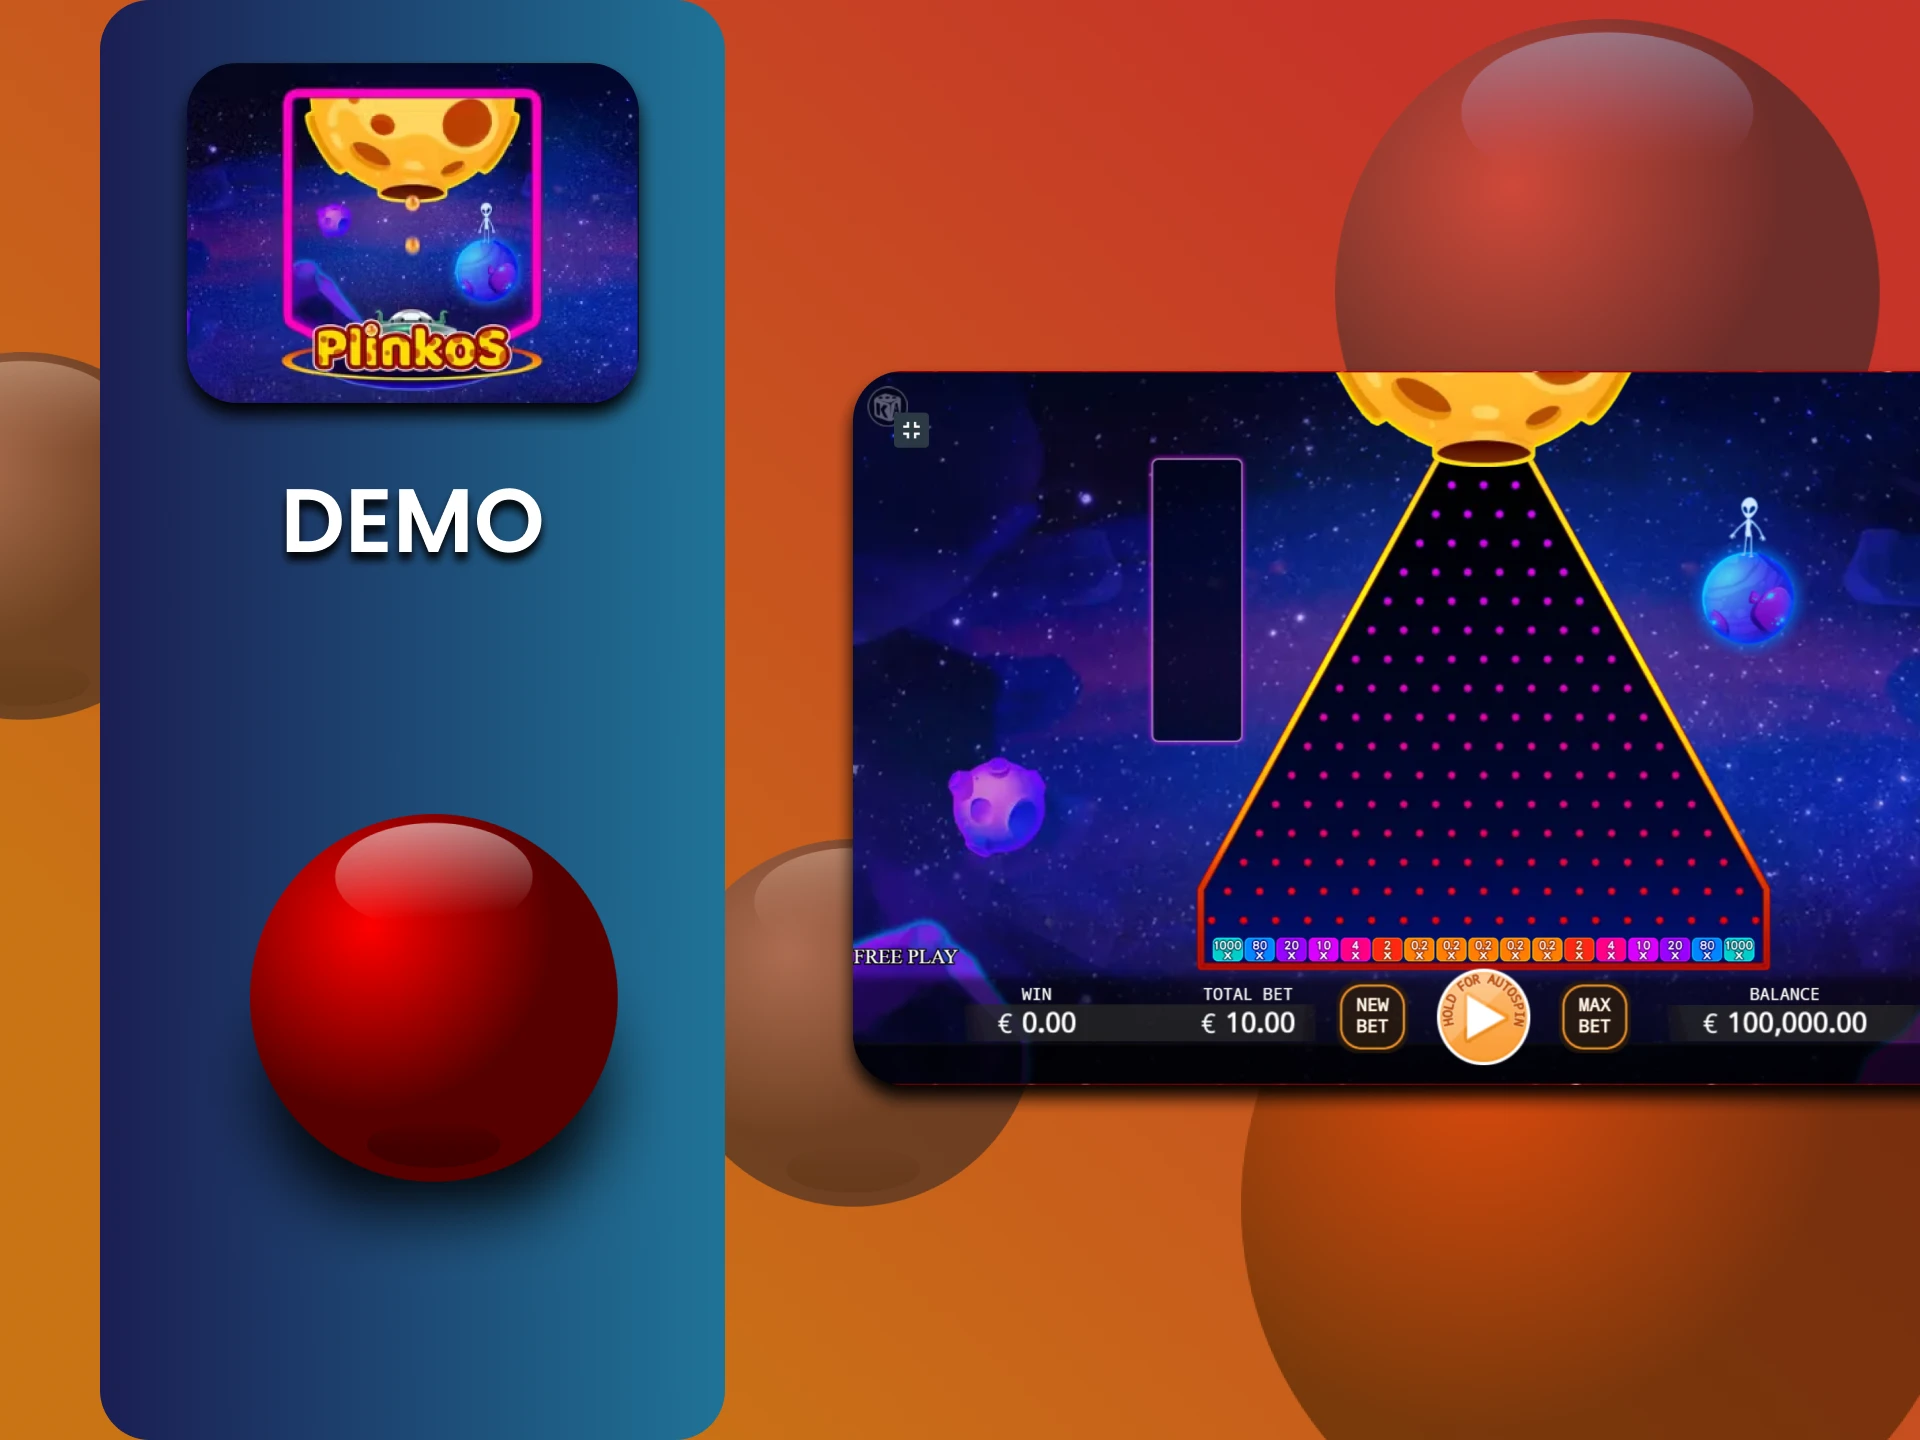 Practice in the demo version of the game PlinkoS.